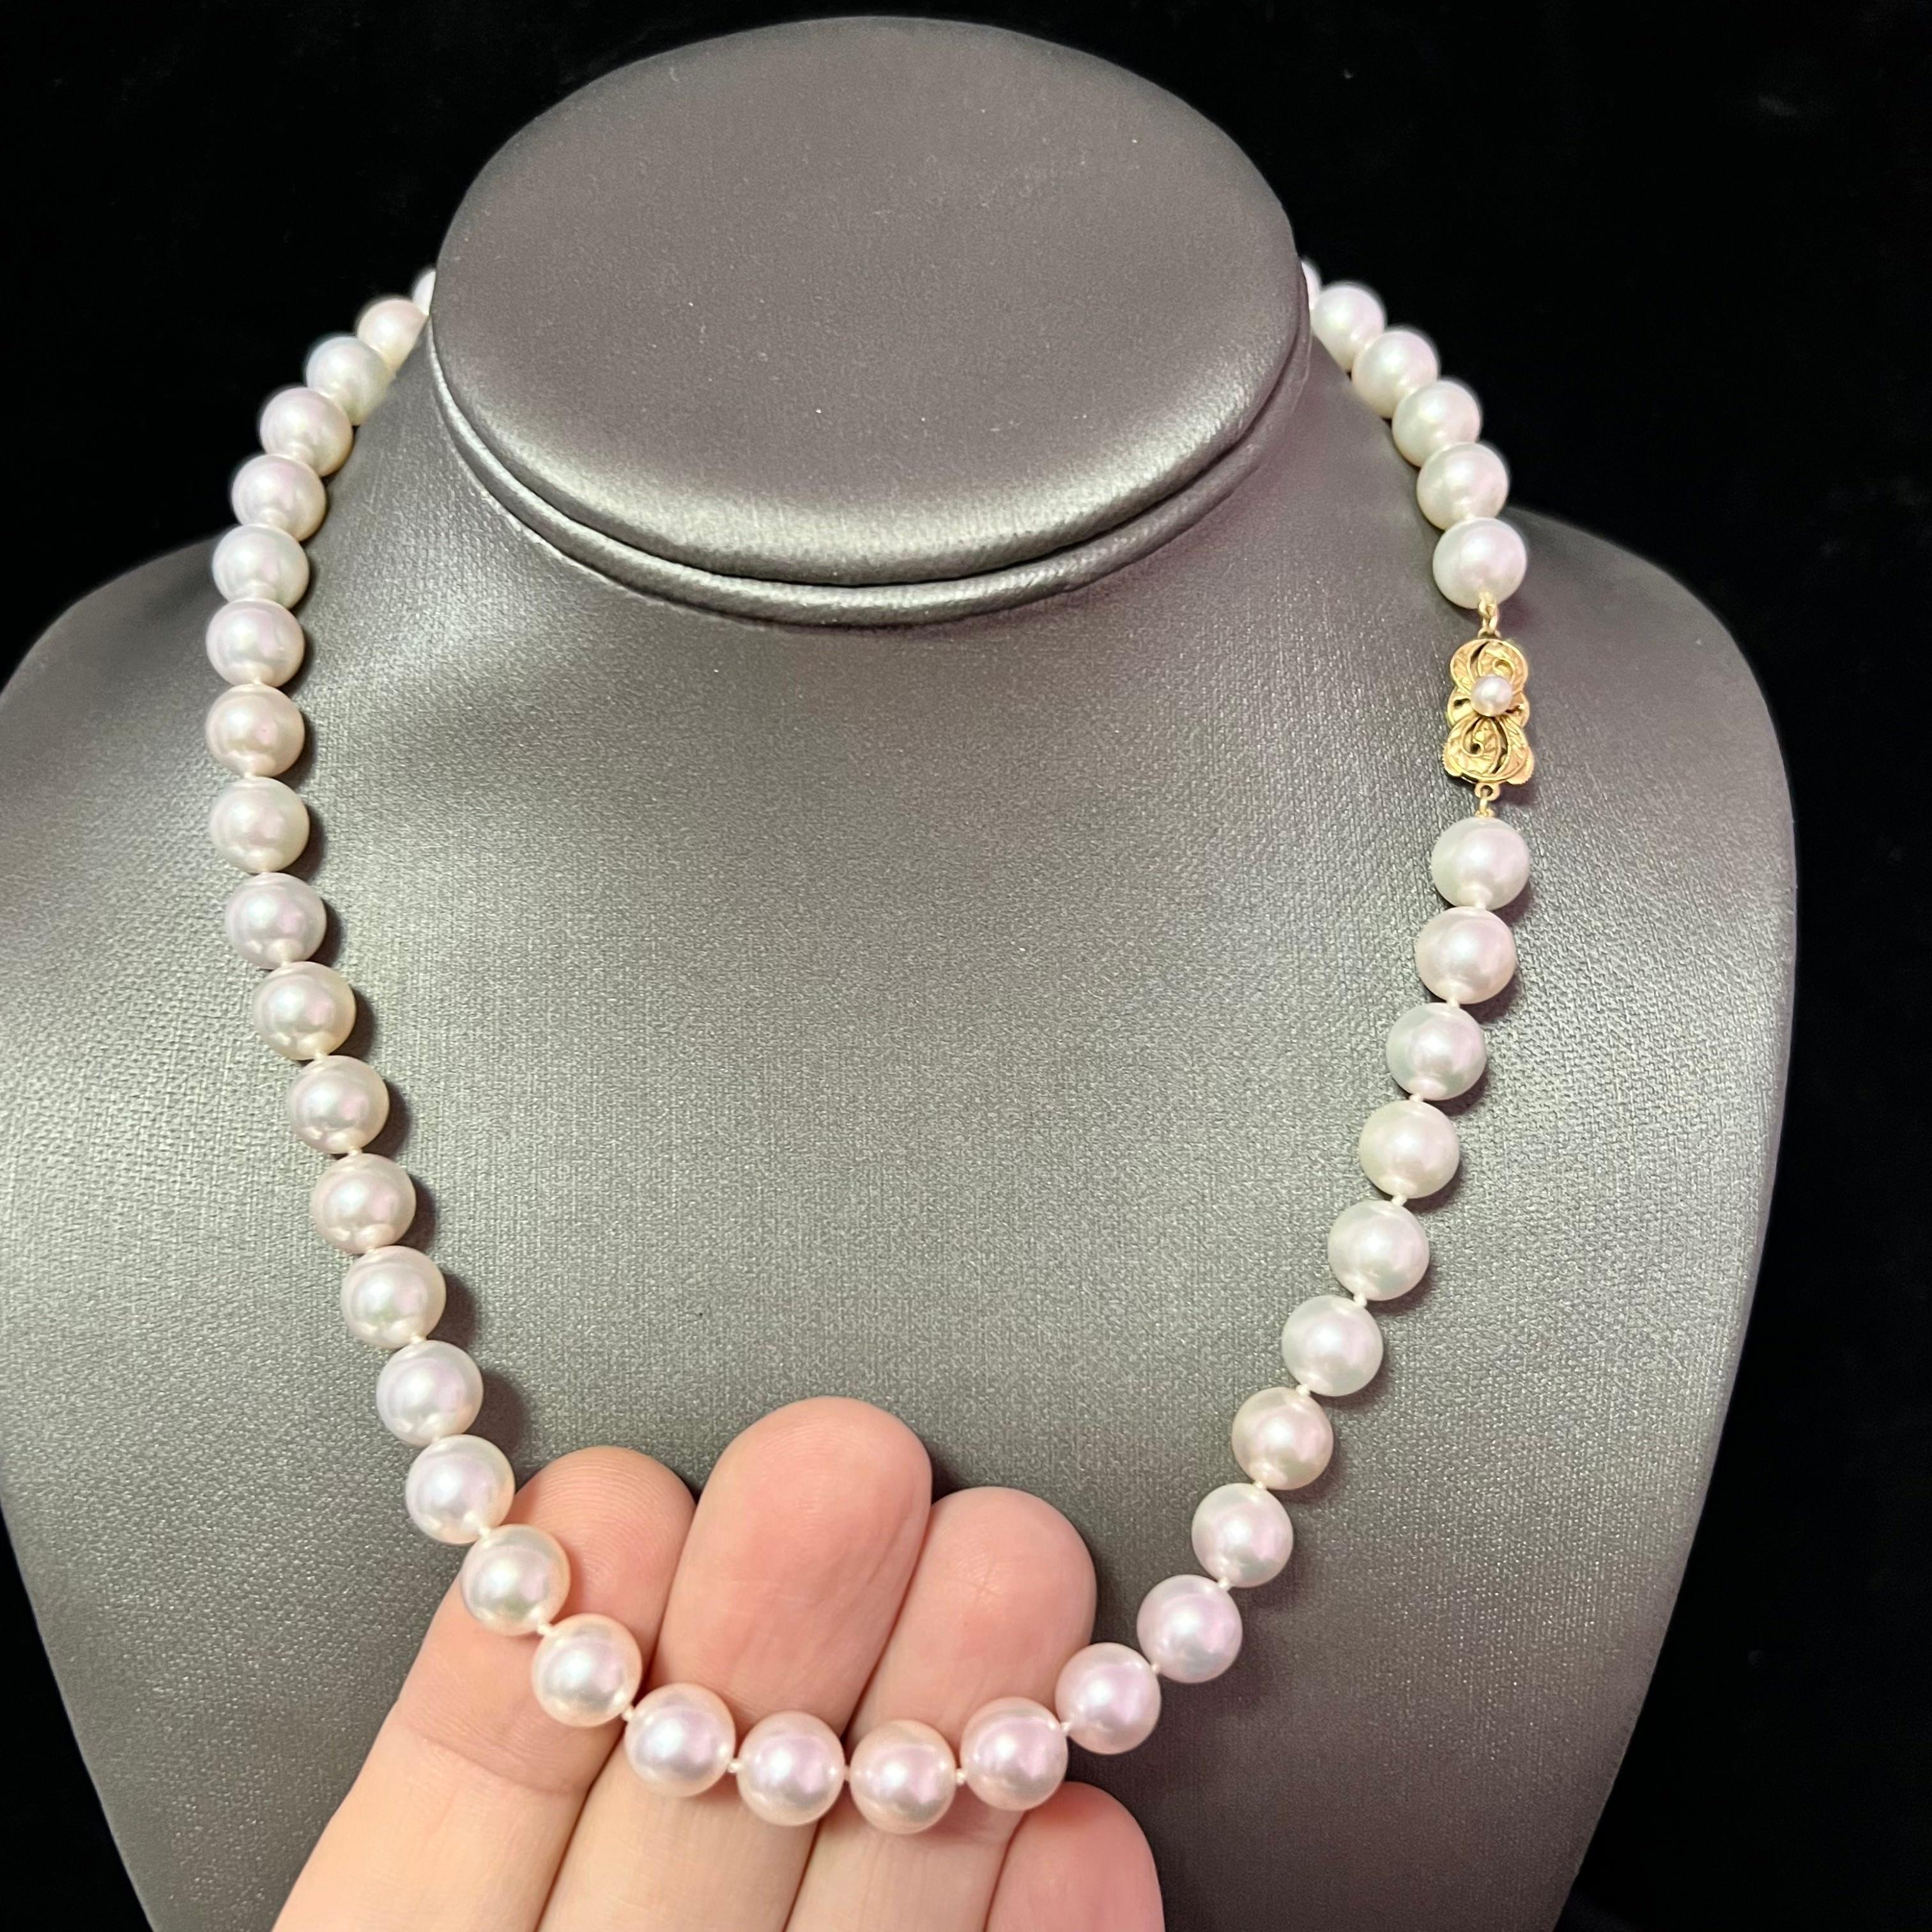 Mikimoto Estate Akoya Pearl Necklace 14k Gold 9 mm AAA Certified 1